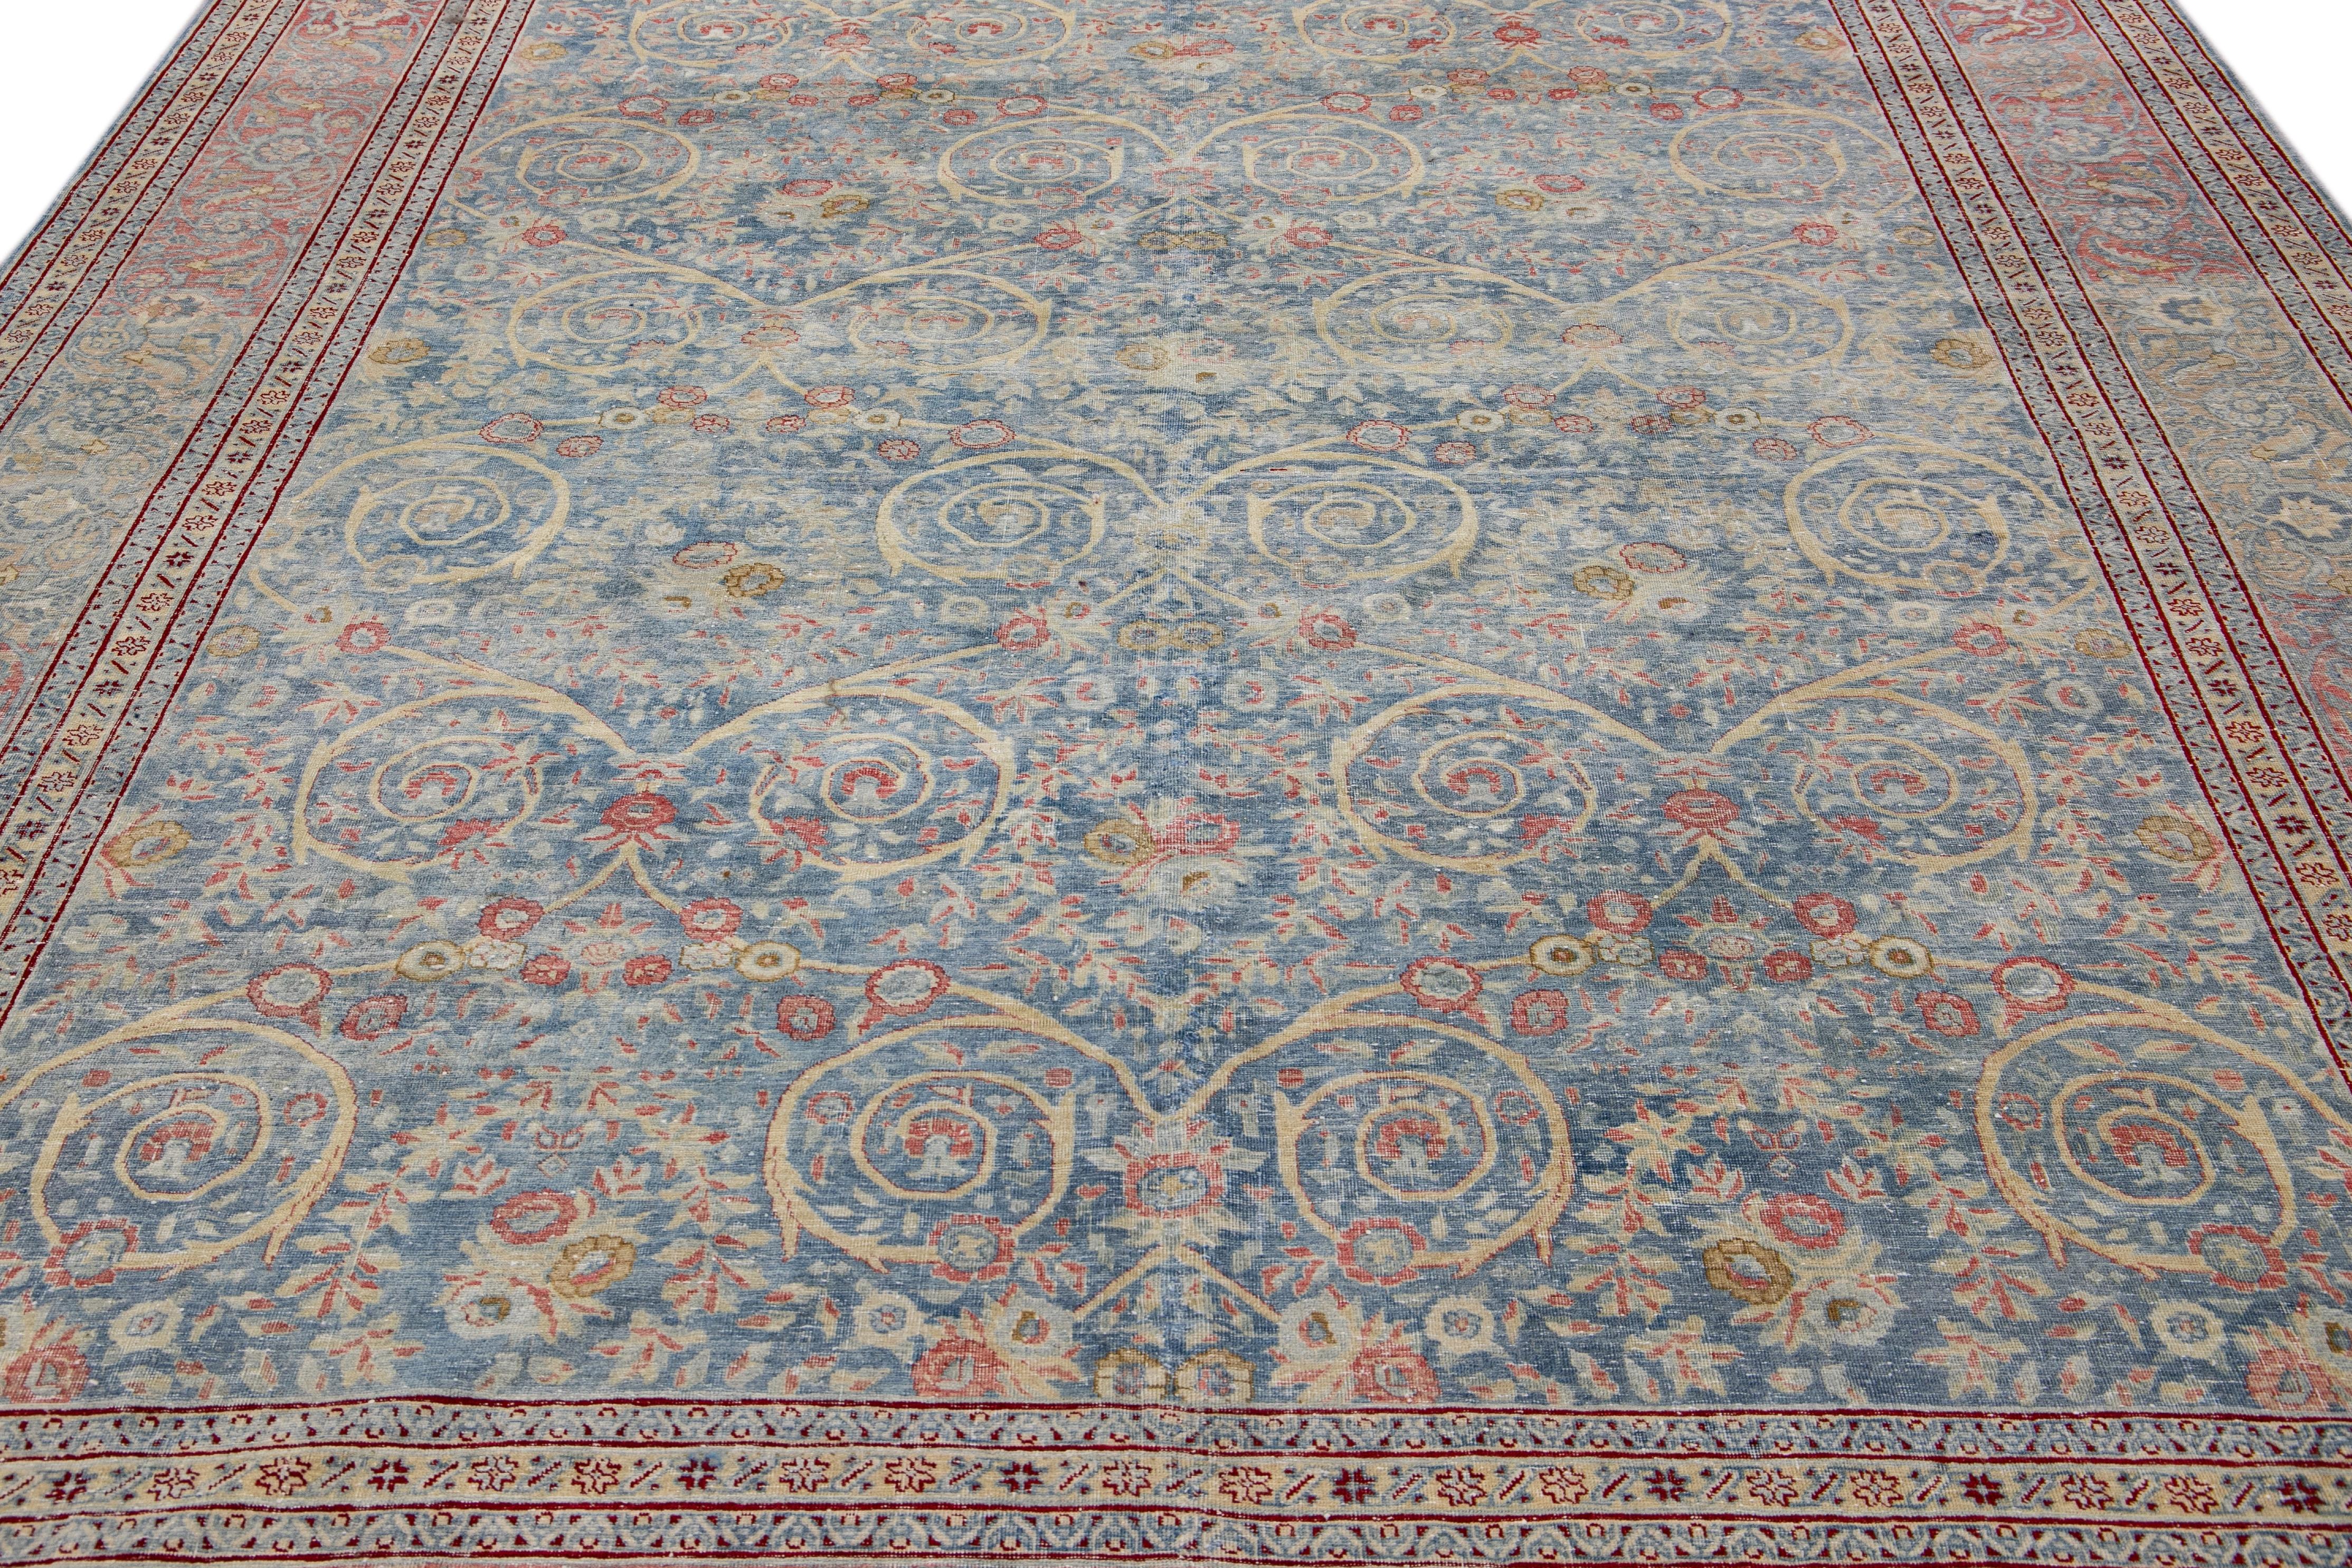 Antique Blue Tabriz Handmade Allover Designed Persian Wool Rug In Good Condition For Sale In Norwalk, CT